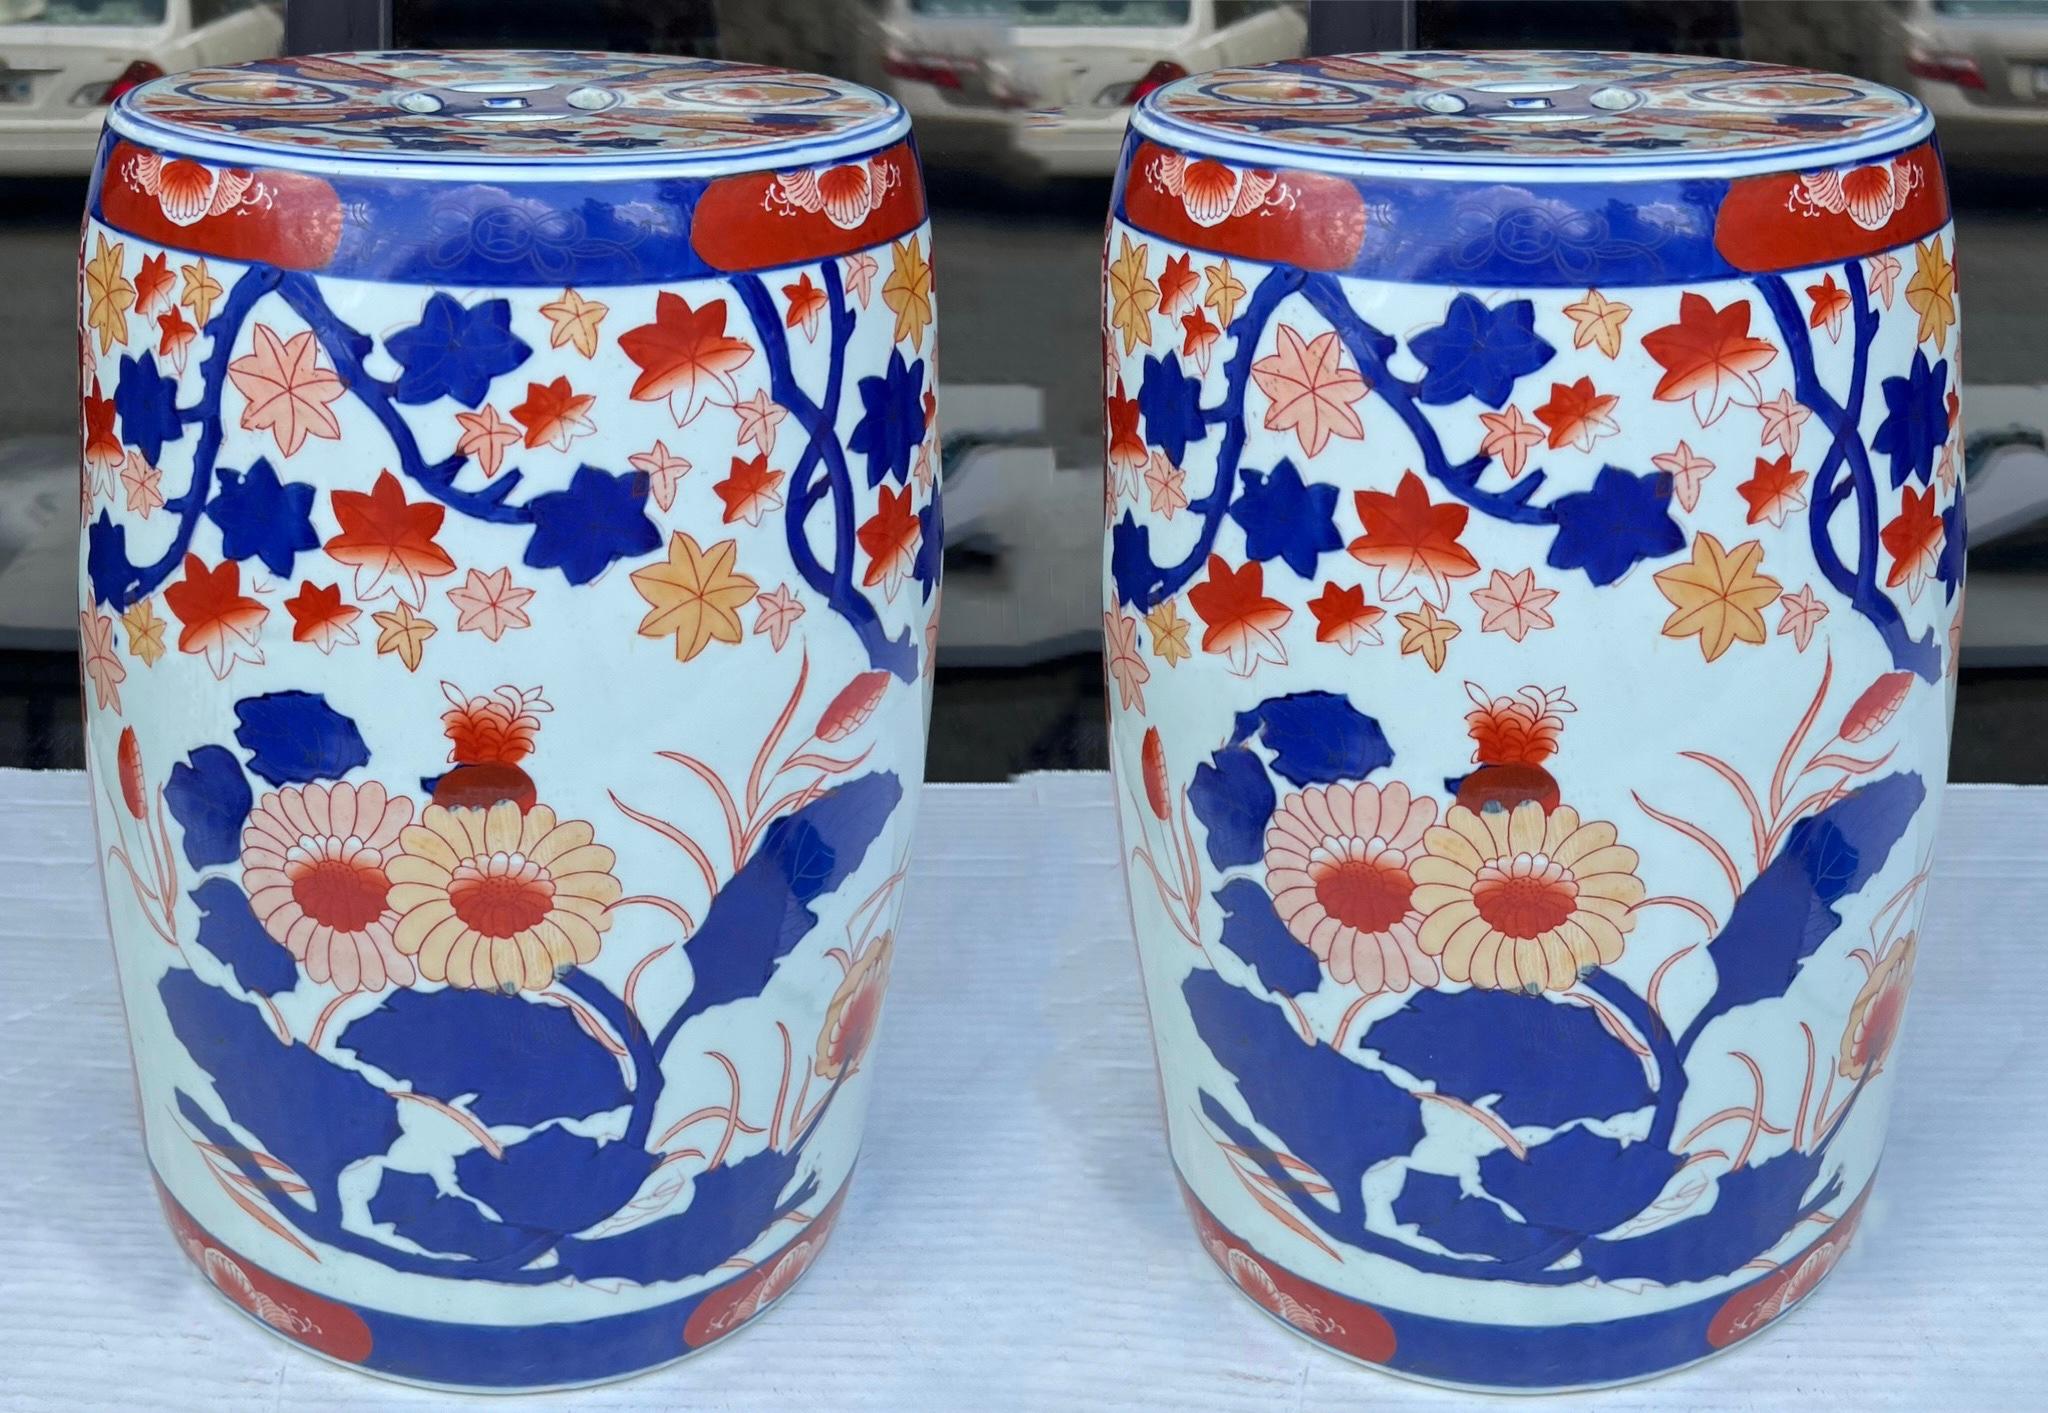 These are lovely. They are a pair of late 20th century Imari or Chinese Export style garden seats or side tables. They have vibrant hand painted blue and Orange hues on a white background. They are in very good condition.